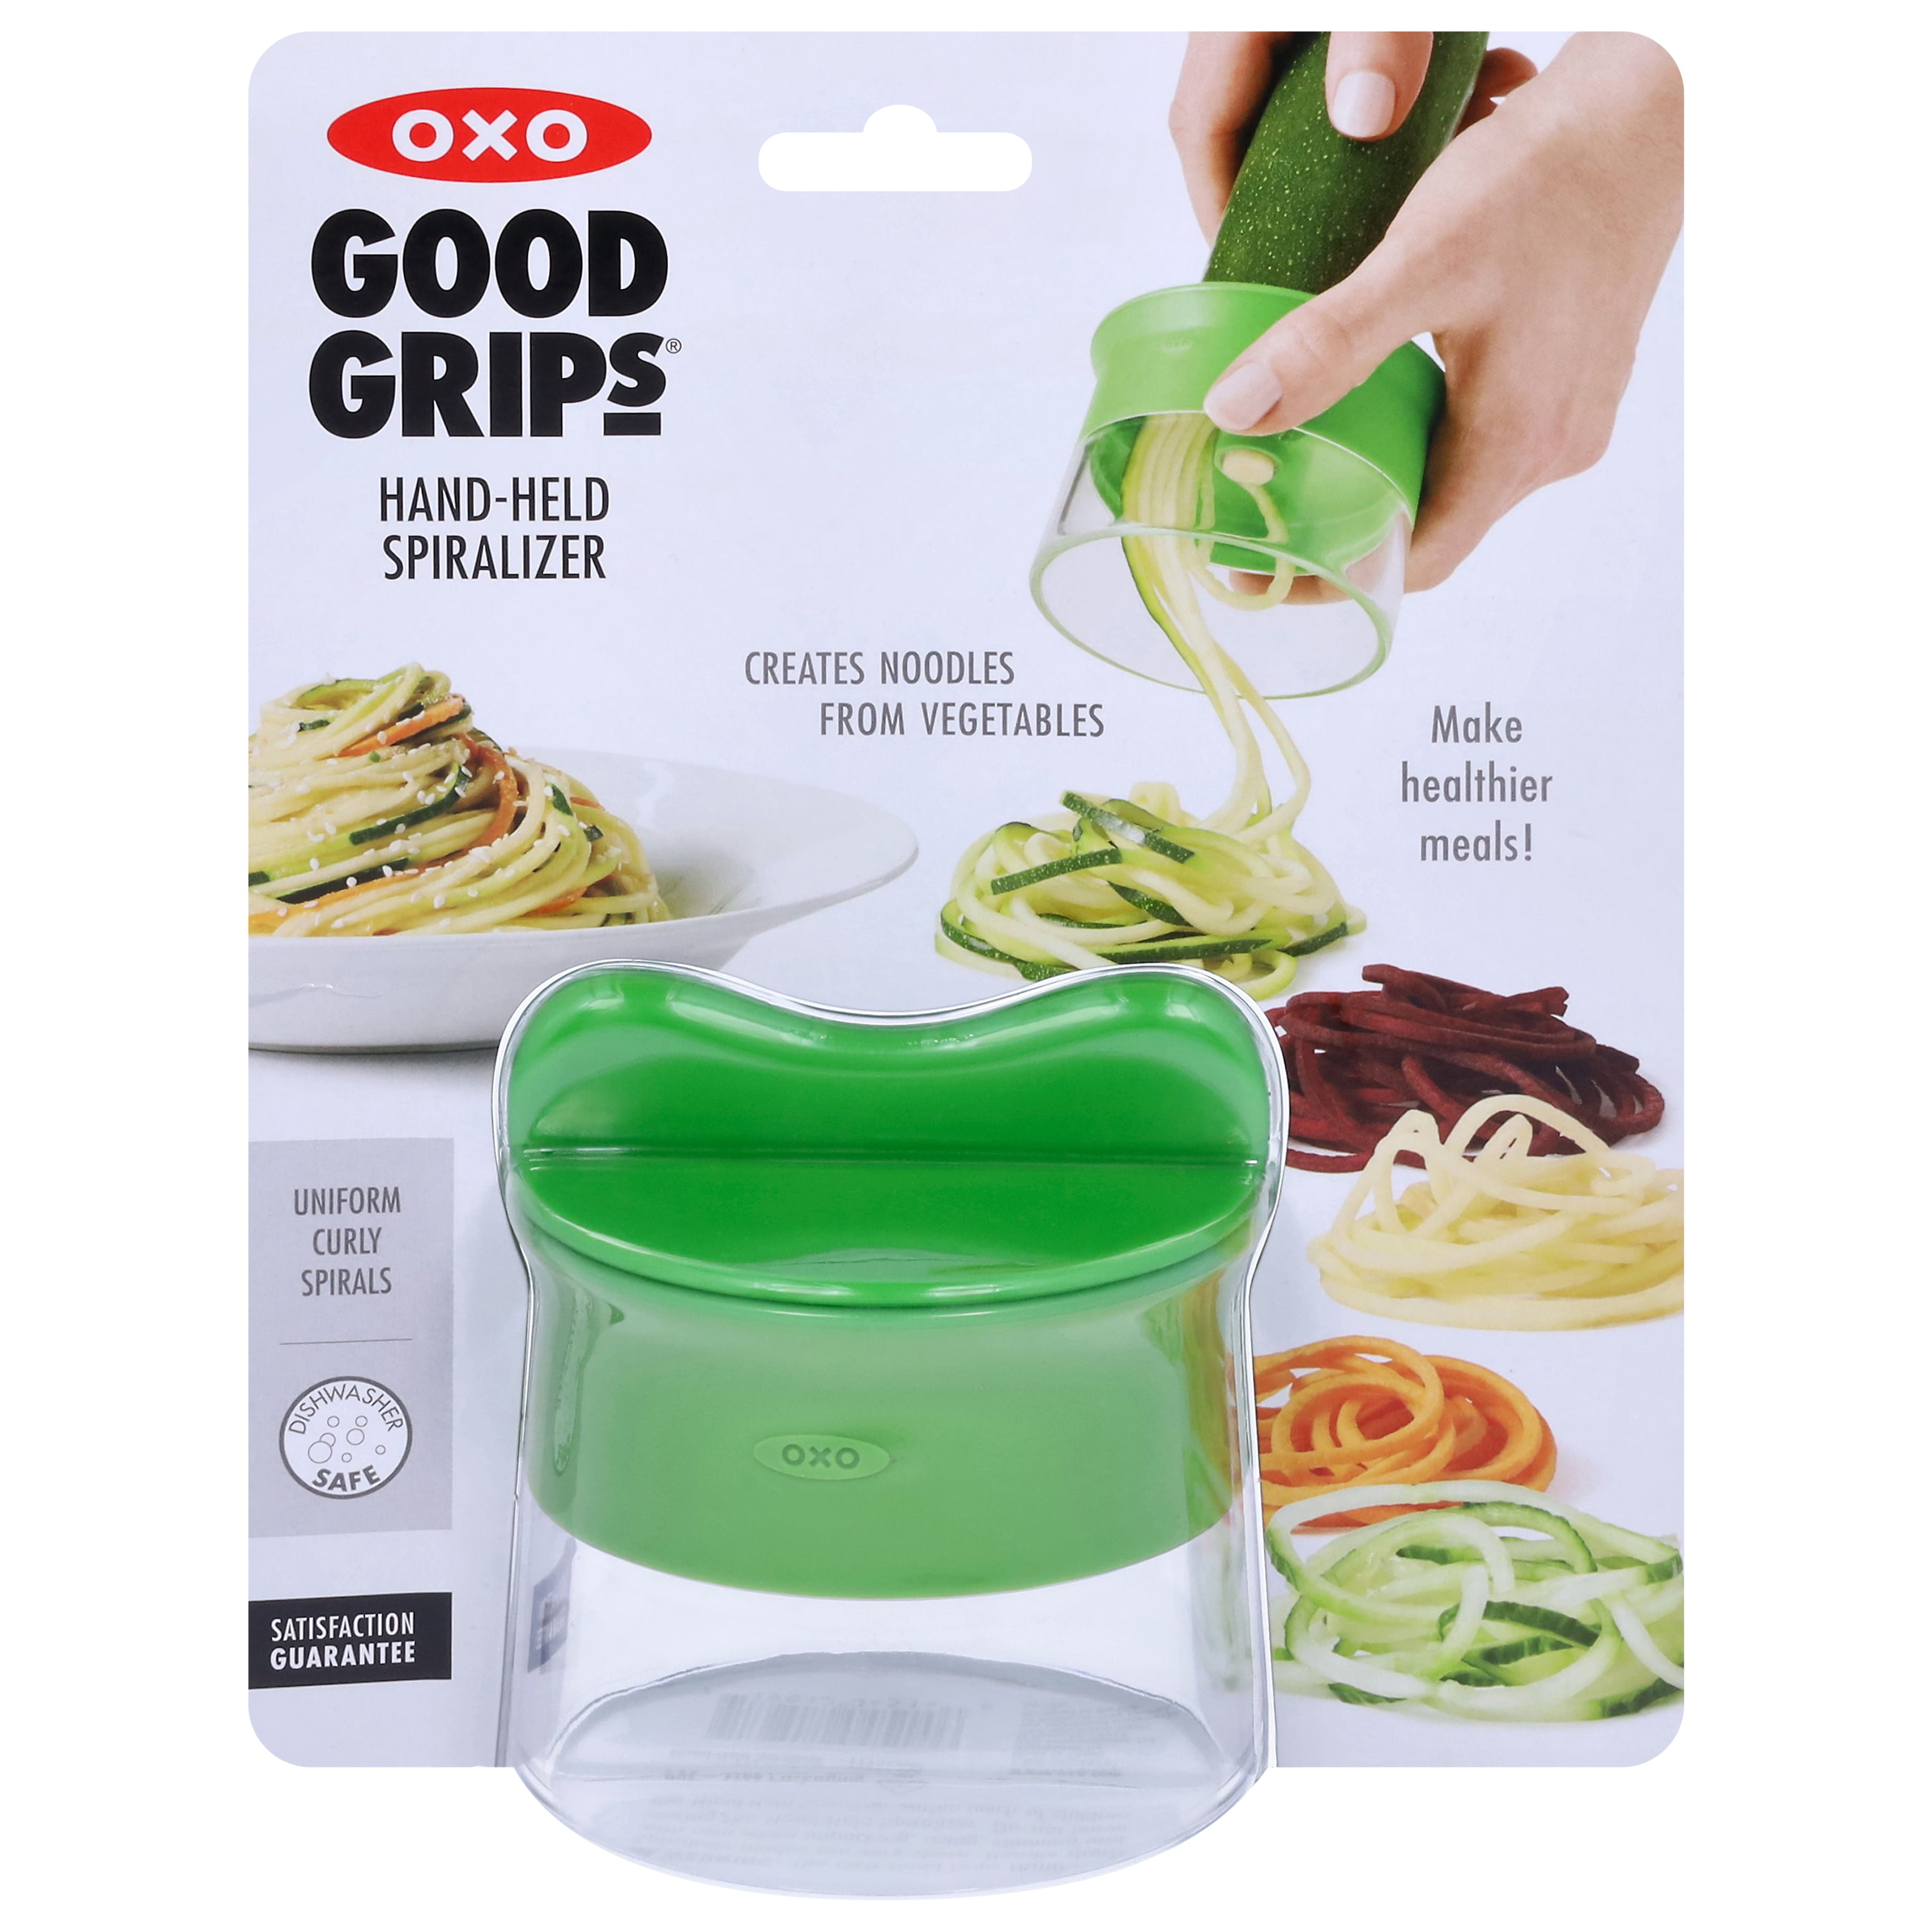 Make Zoodles at Home with this Highly Rated OXO Spiralizer